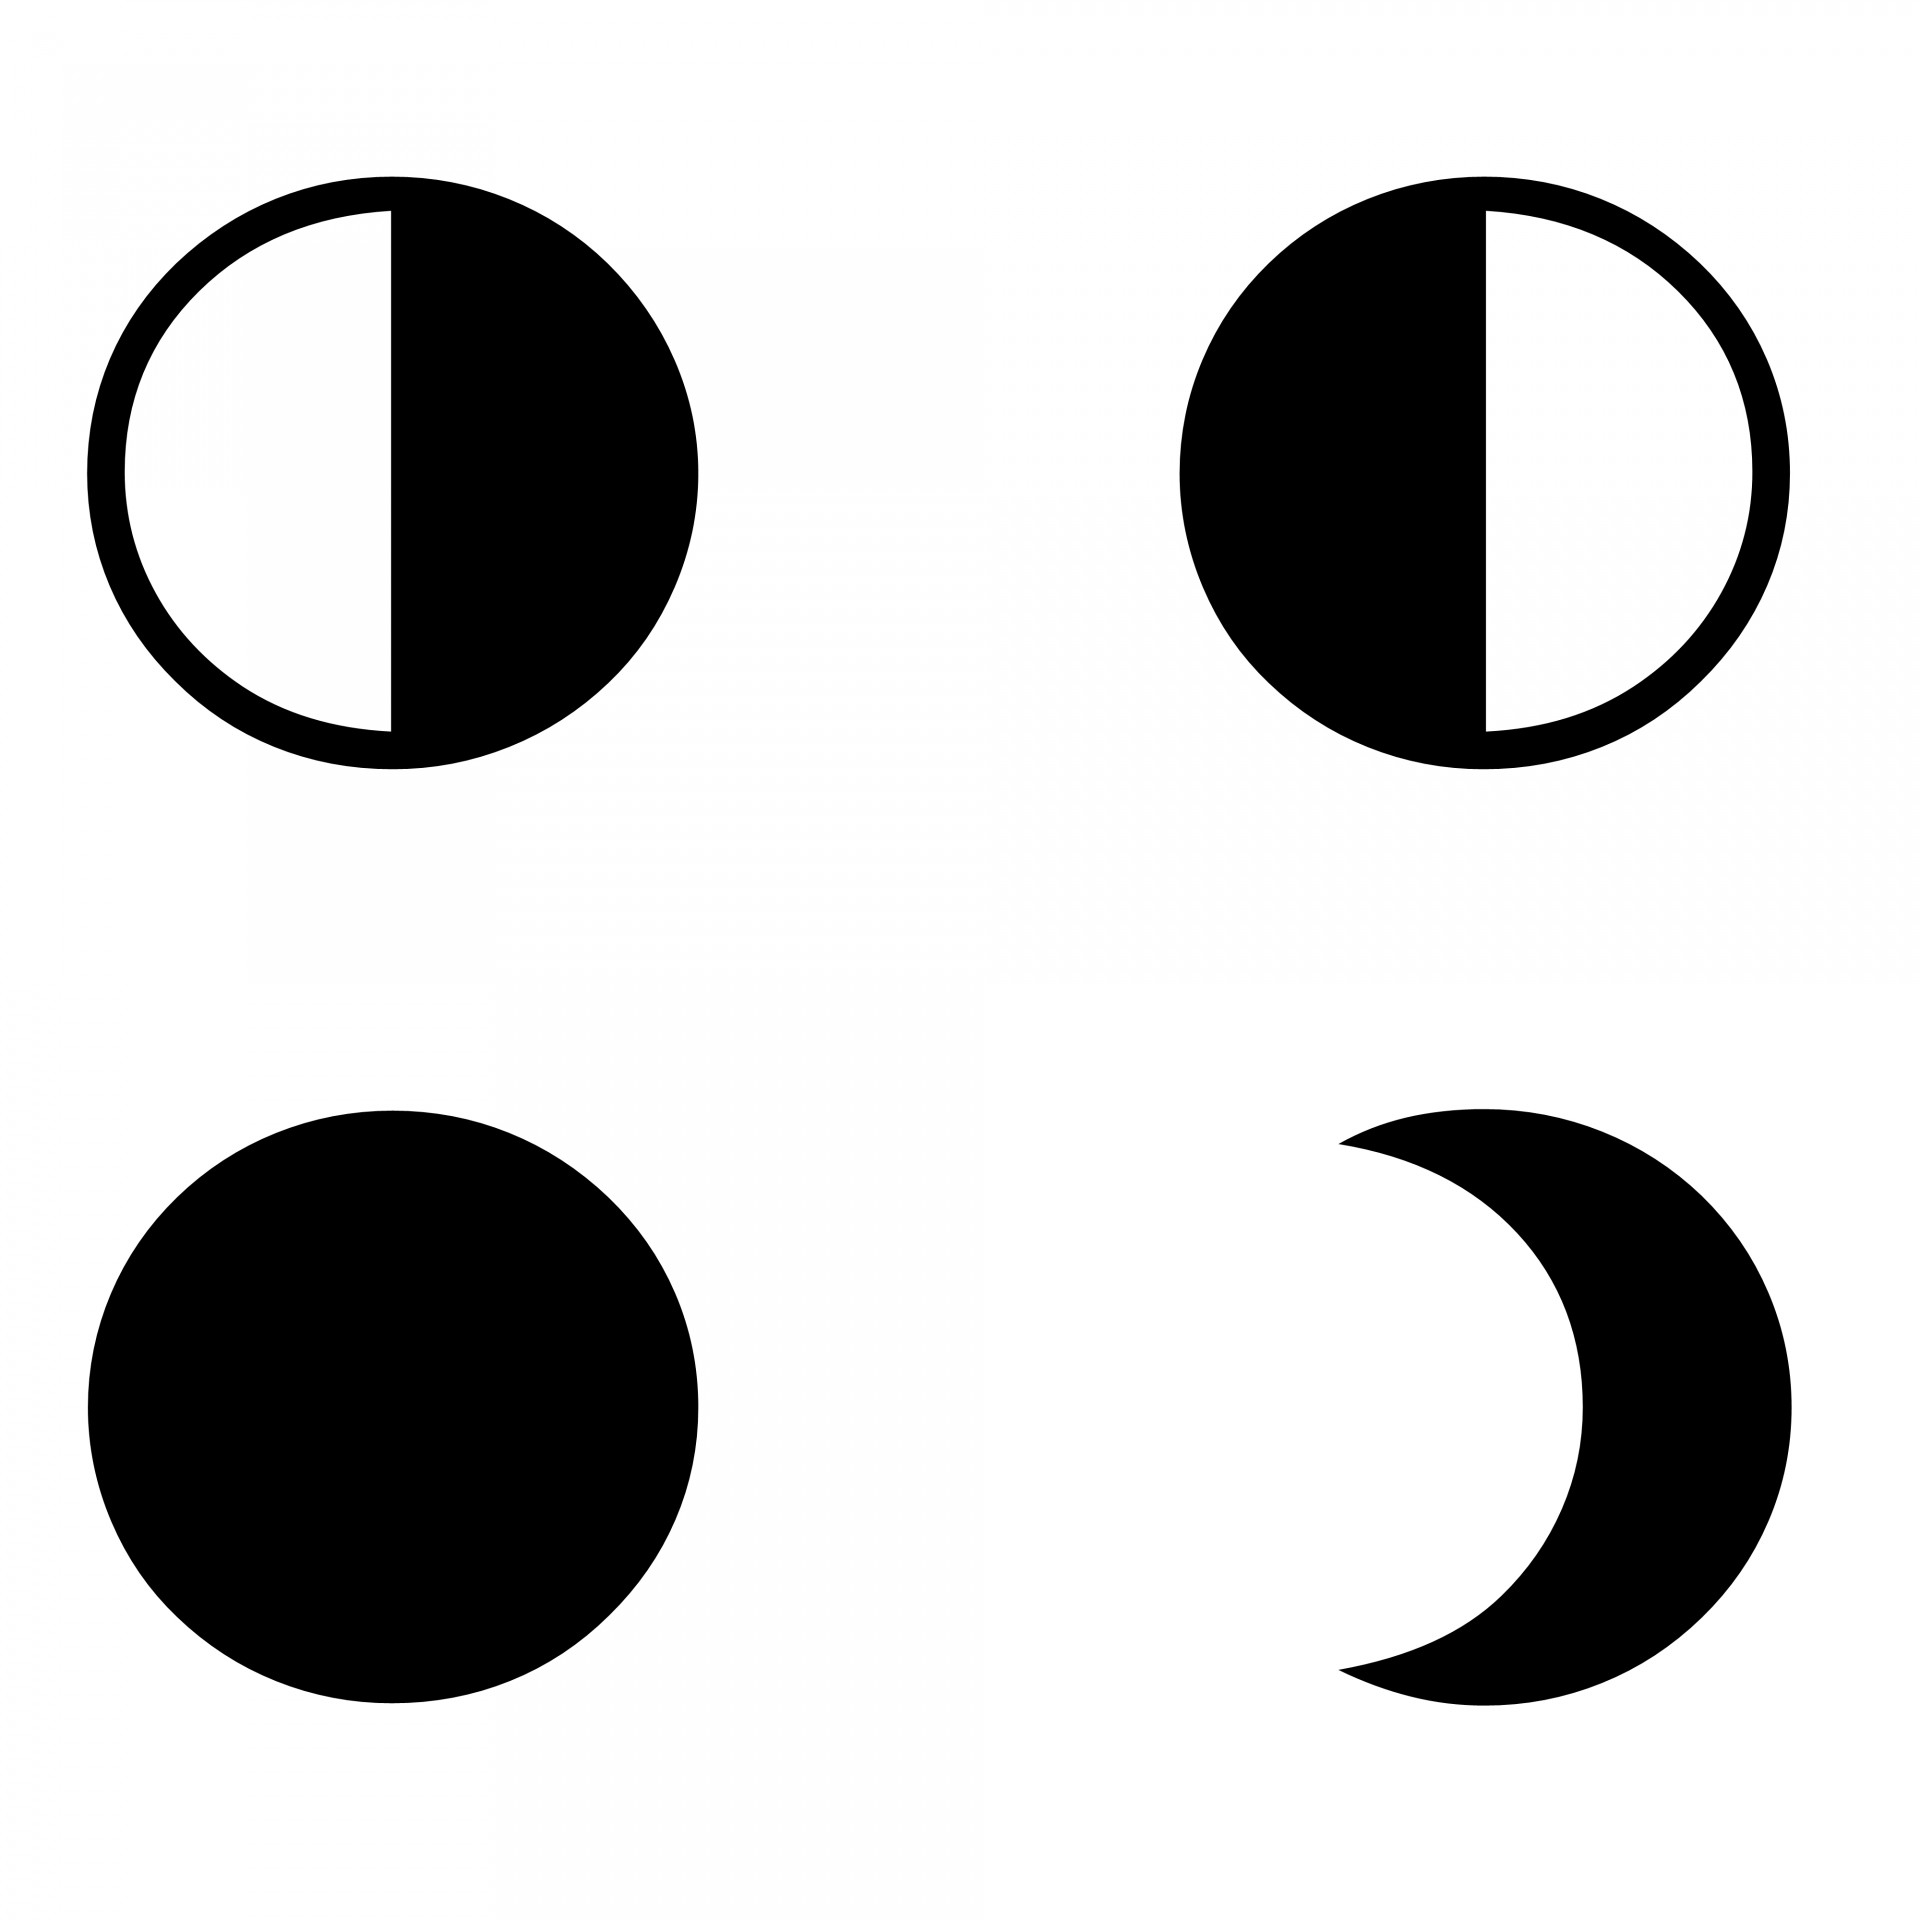 Moon phases silhouettes with stars. Crescent, new, full, surface